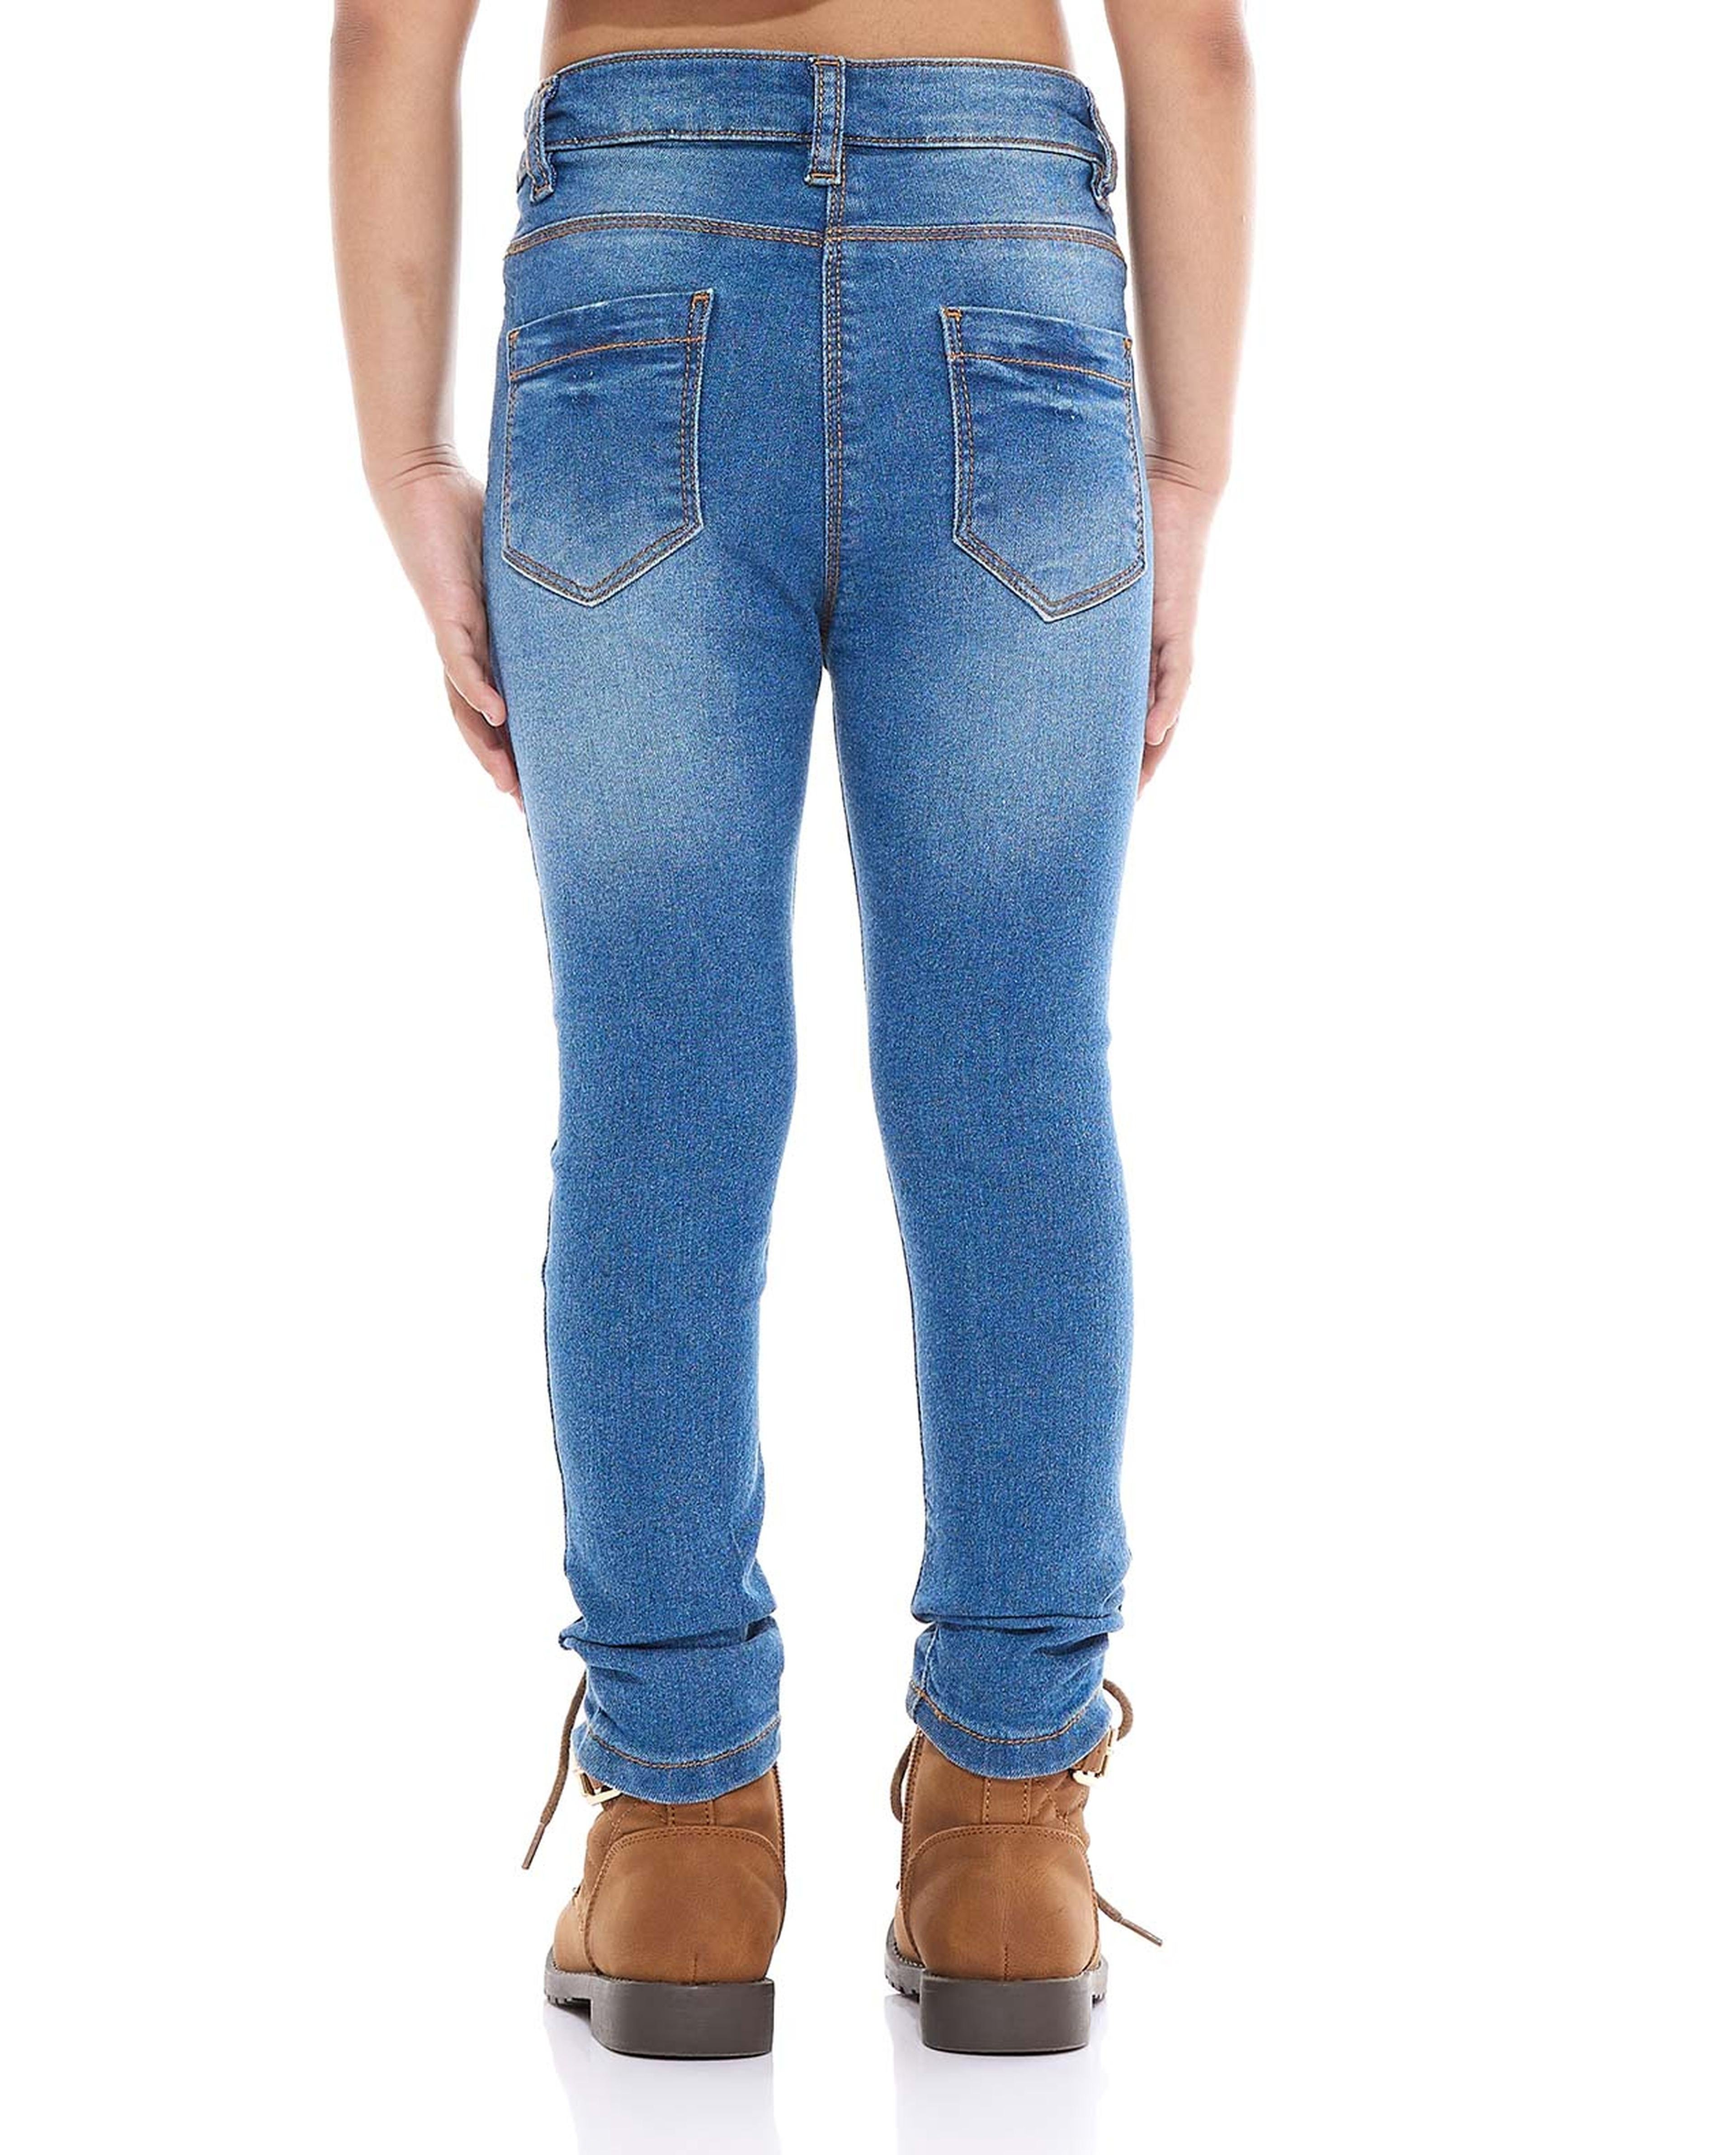 Sequins Skinny Fit Jeans with Button Closure